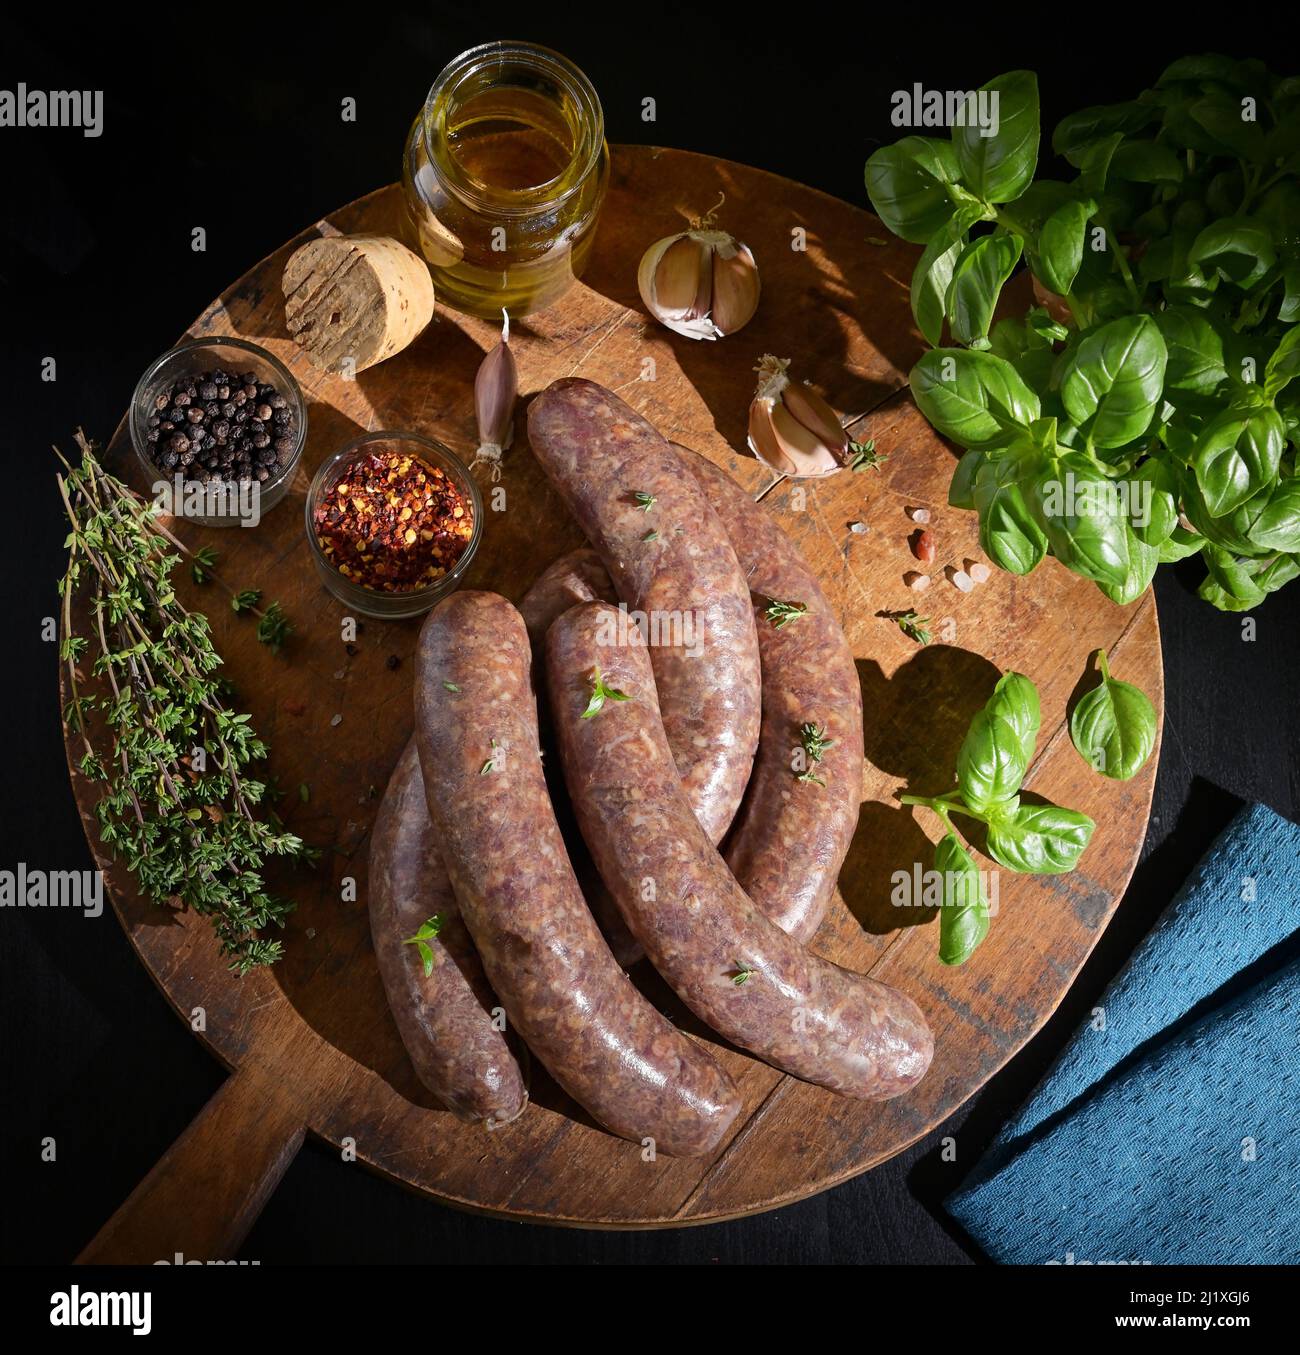 Uncooked Raw Beef And Pork Sausage Sausages and spices Stock Photo